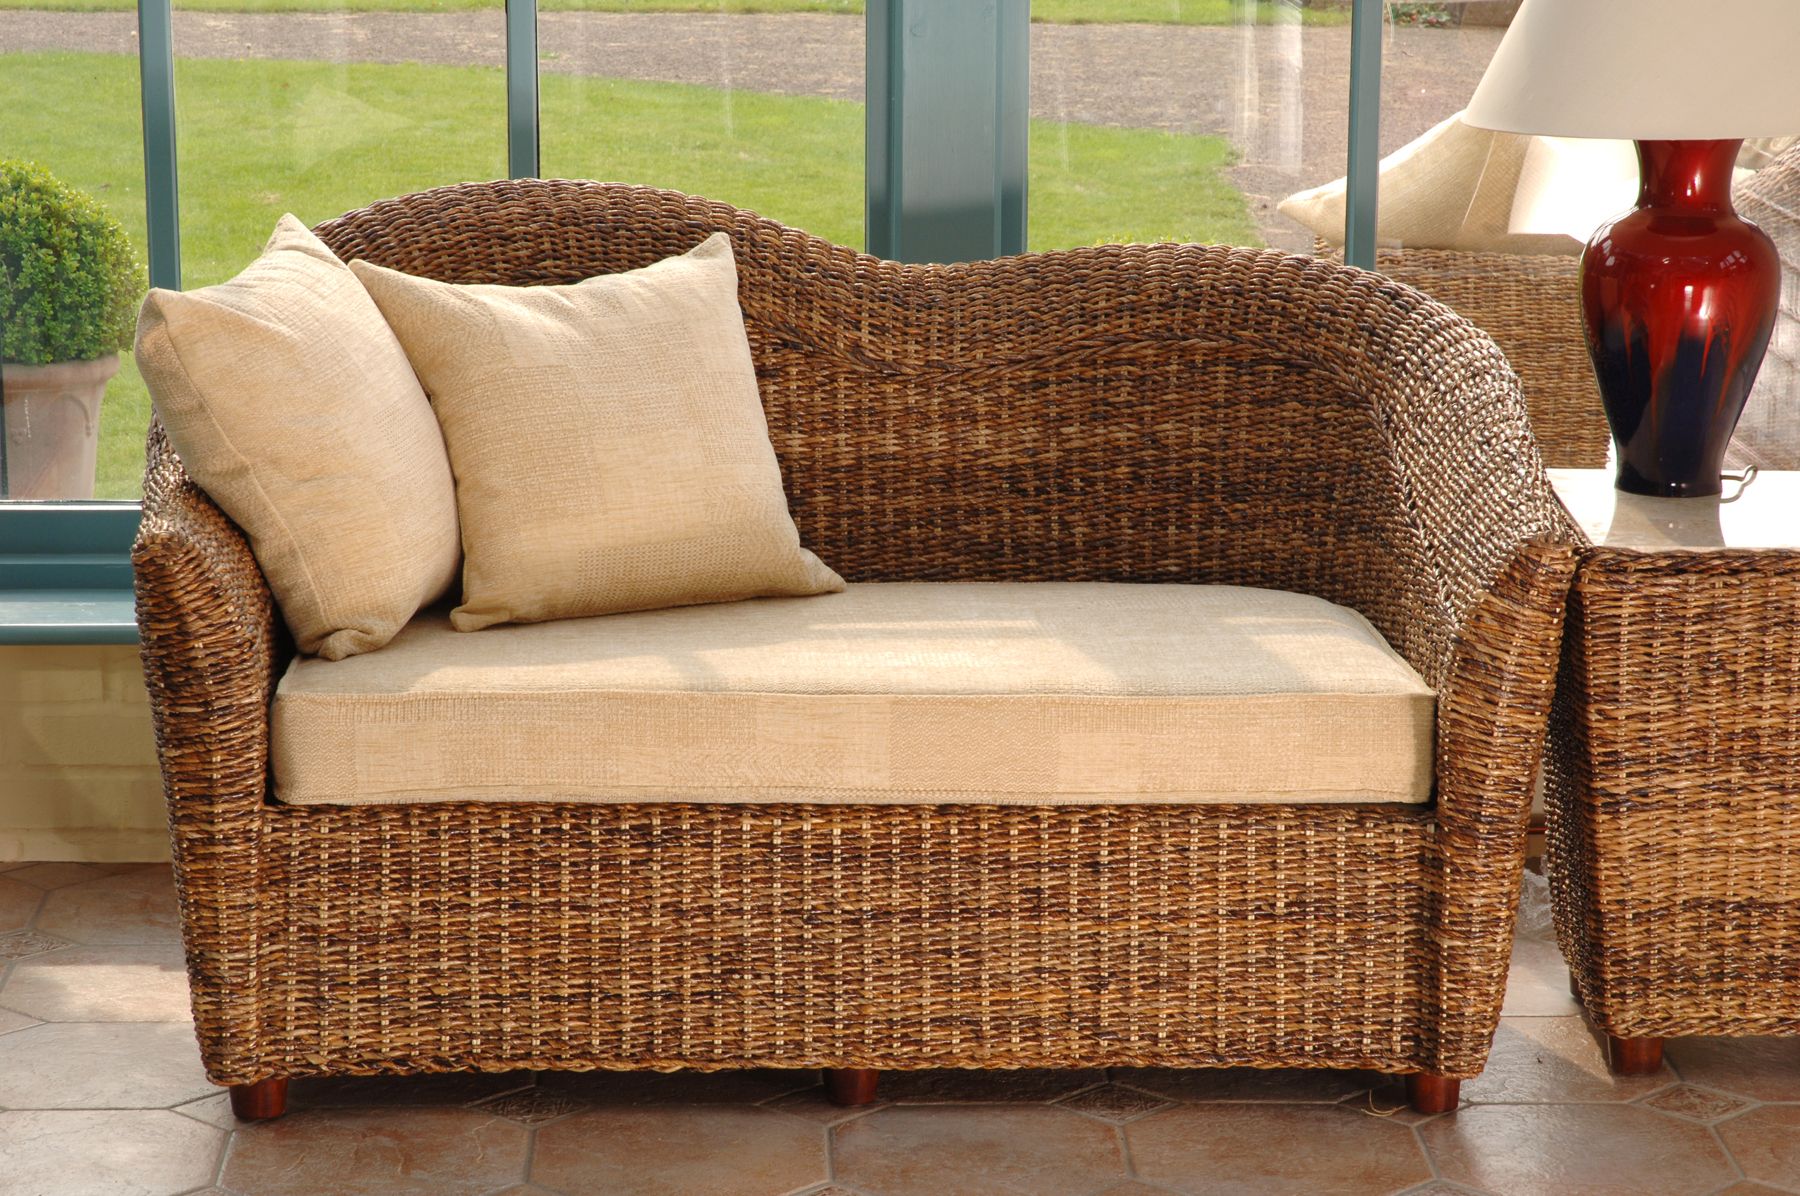 Cane Conservatory Furniture|banana Leaf Furniture|cane Intended For Natural Woven Banana Console Tables (Photo 15 of 20)